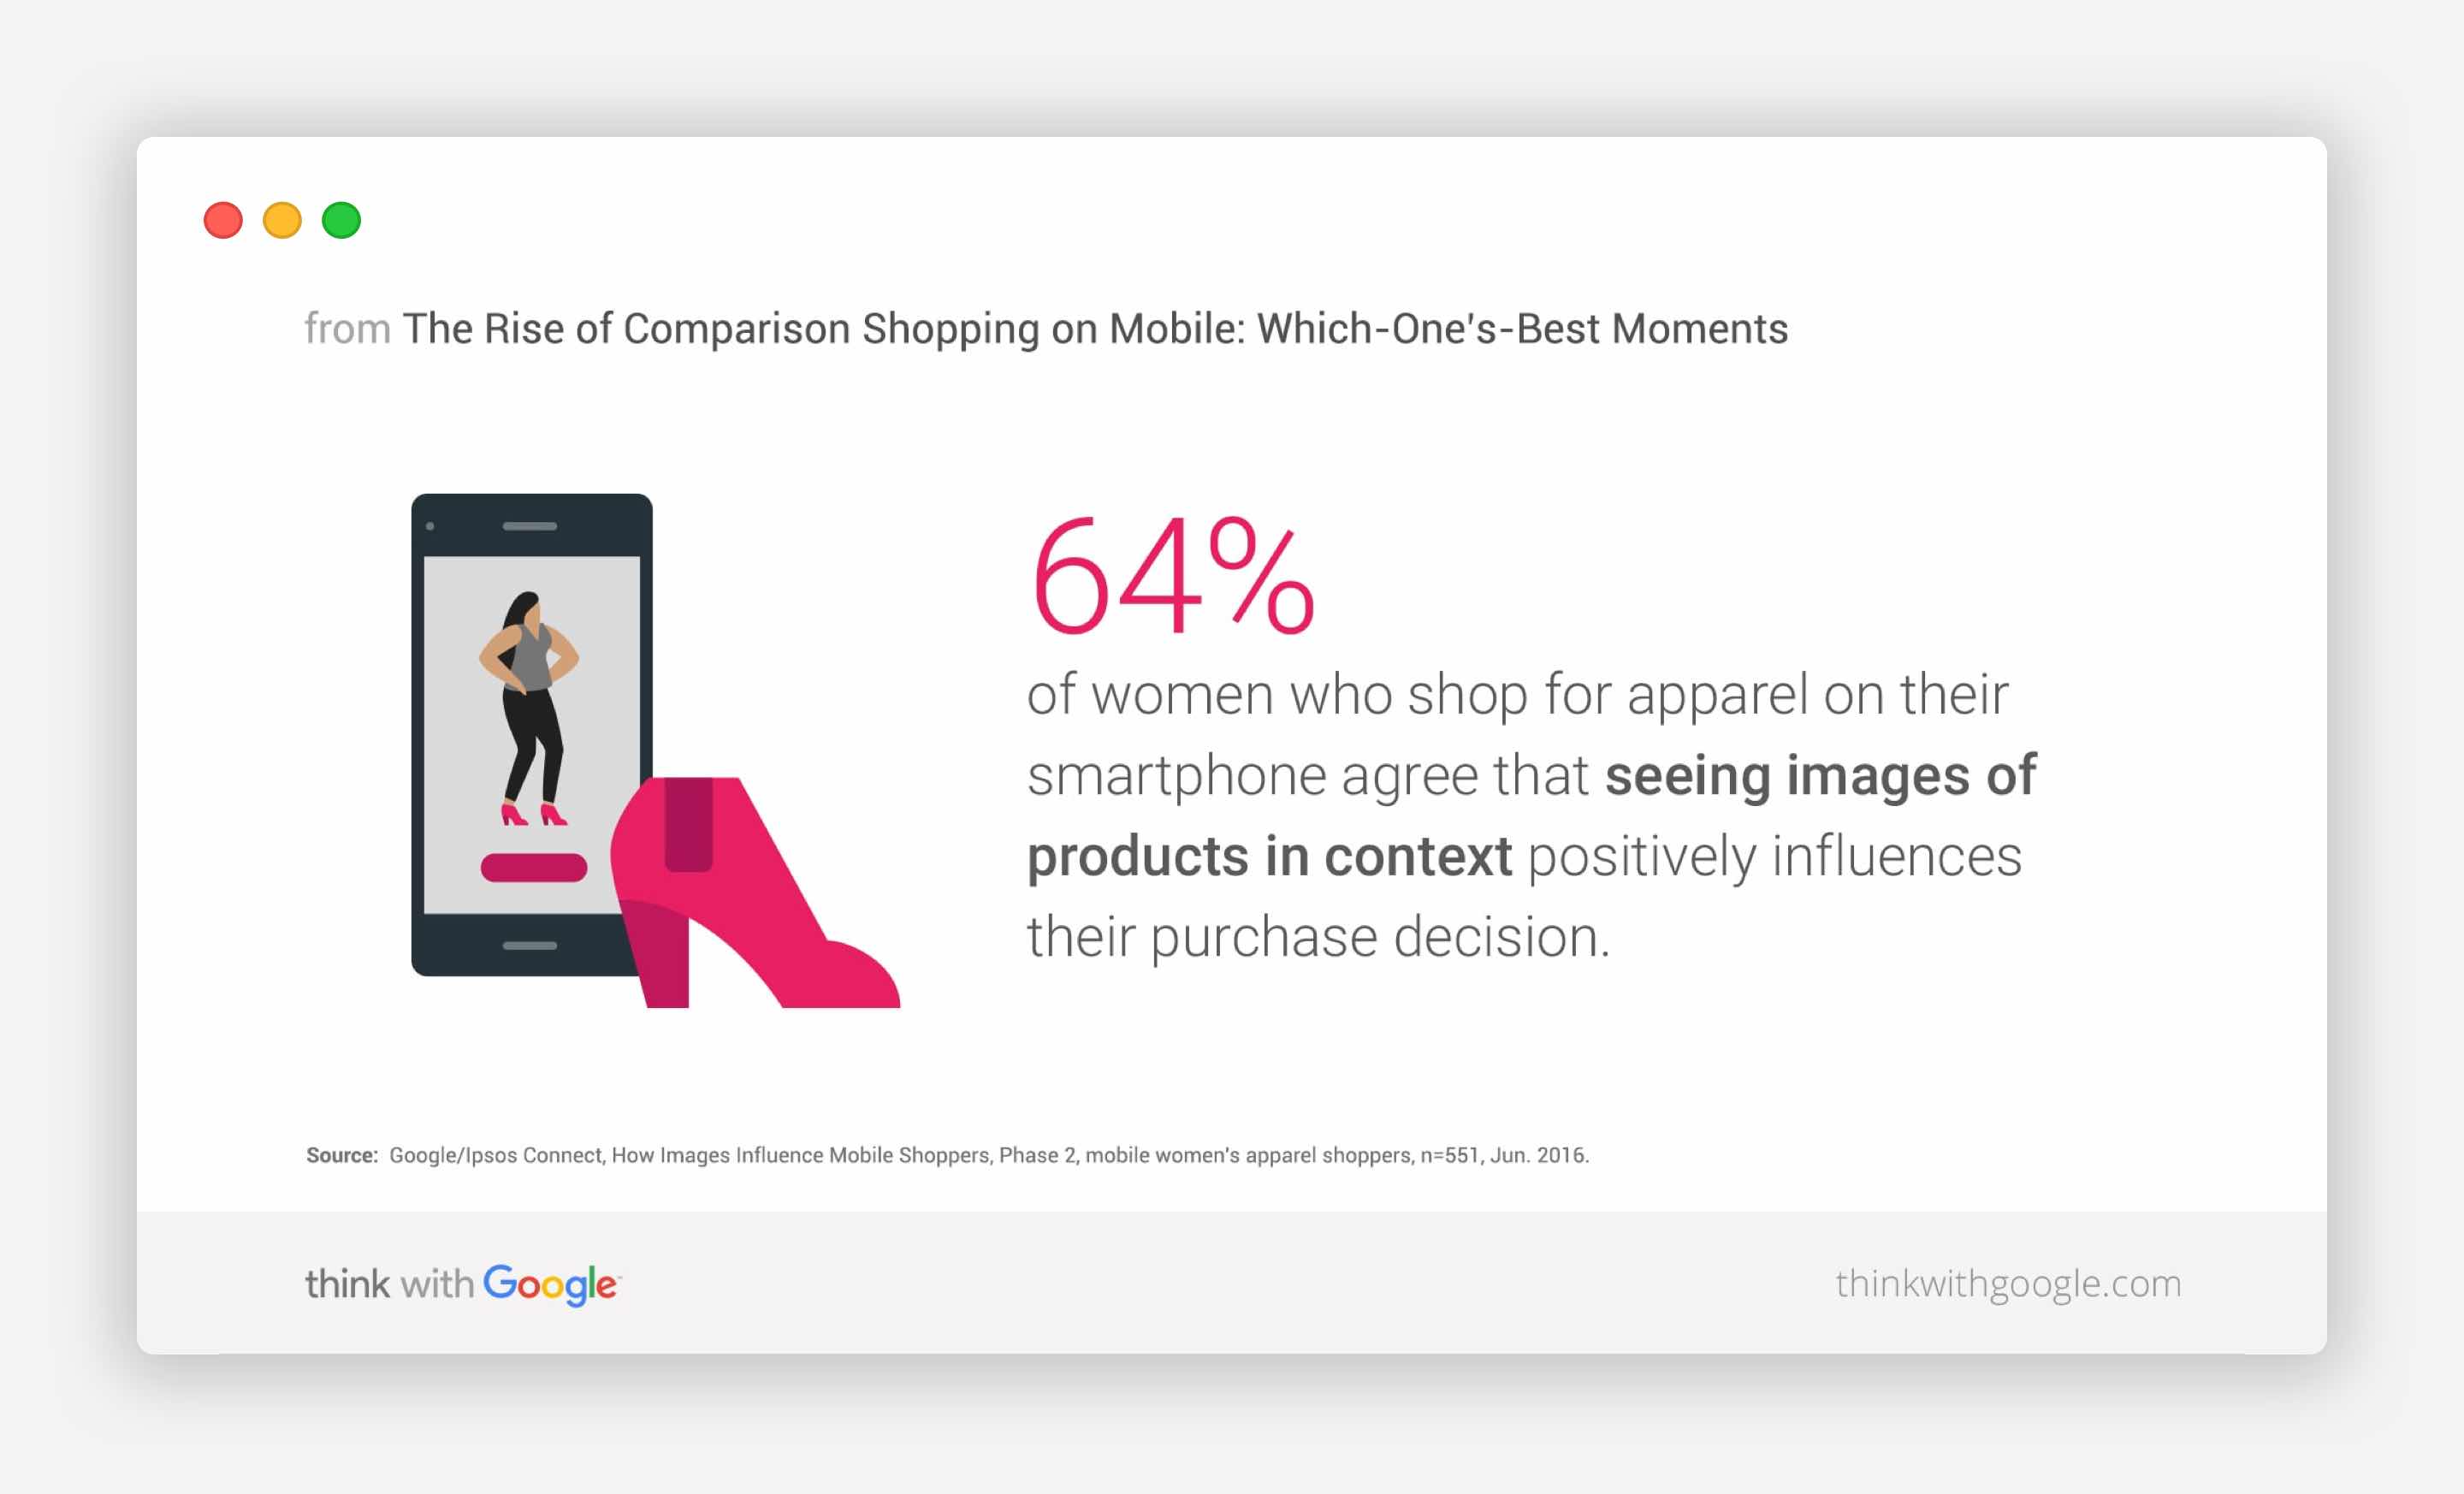 64% of women who shop for apparel on their smartphones say that images influence their purchase decision